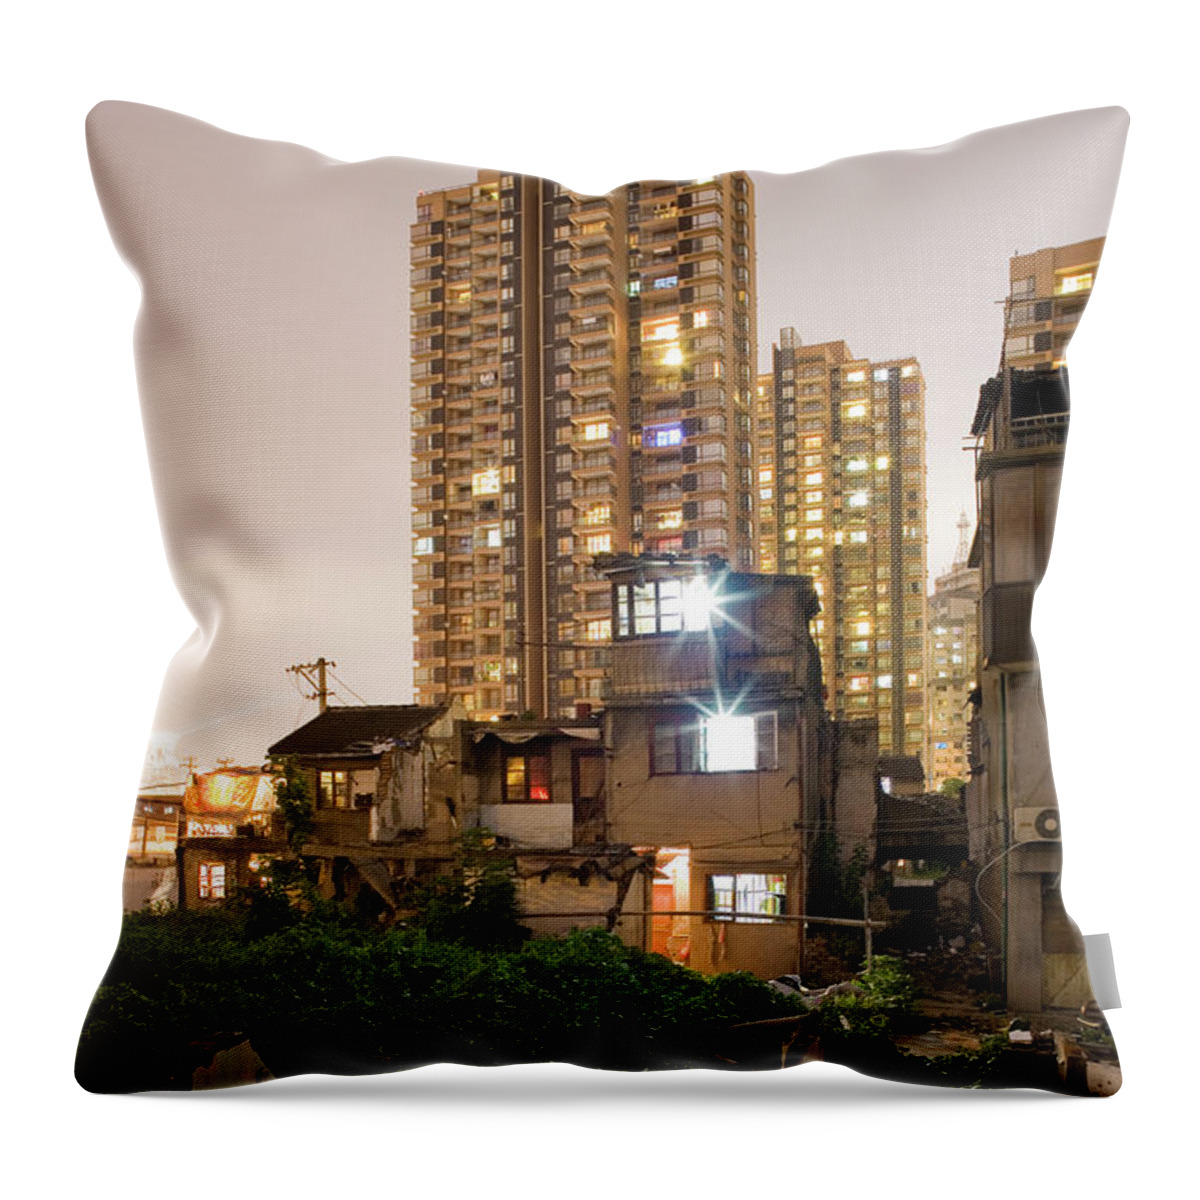 Outdoors Throw Pillow featuring the photograph Shanghai #5 by Arnd Dewald